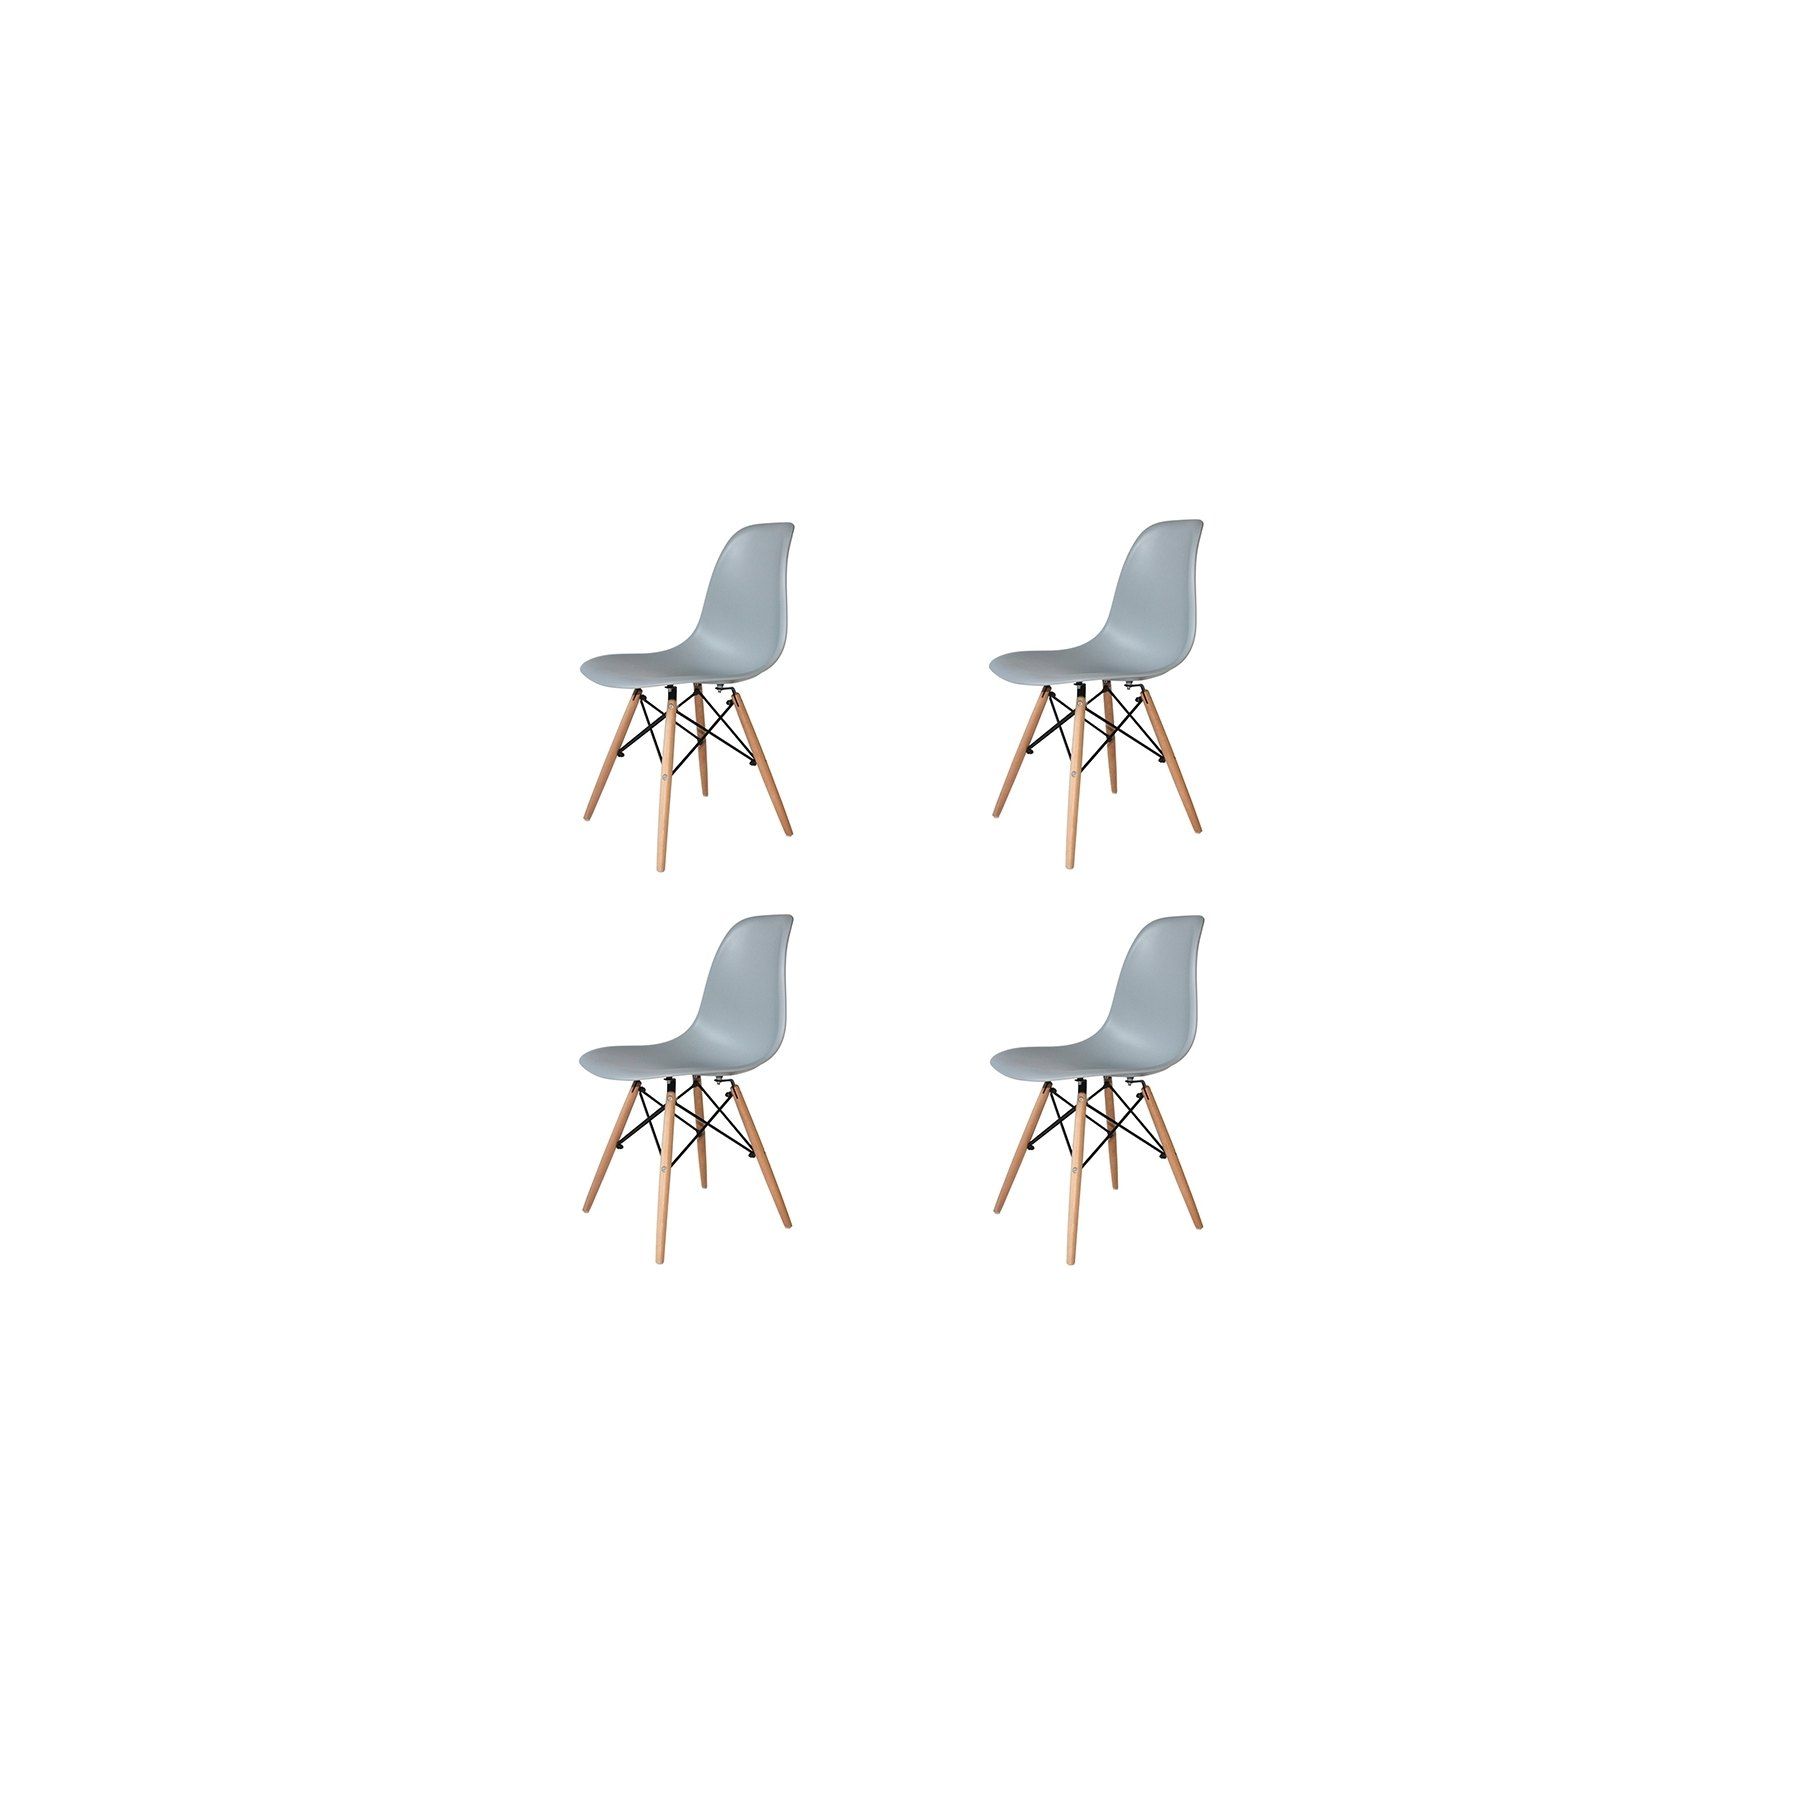 PACK 4 SILLAS TOWER WOOD GRIS